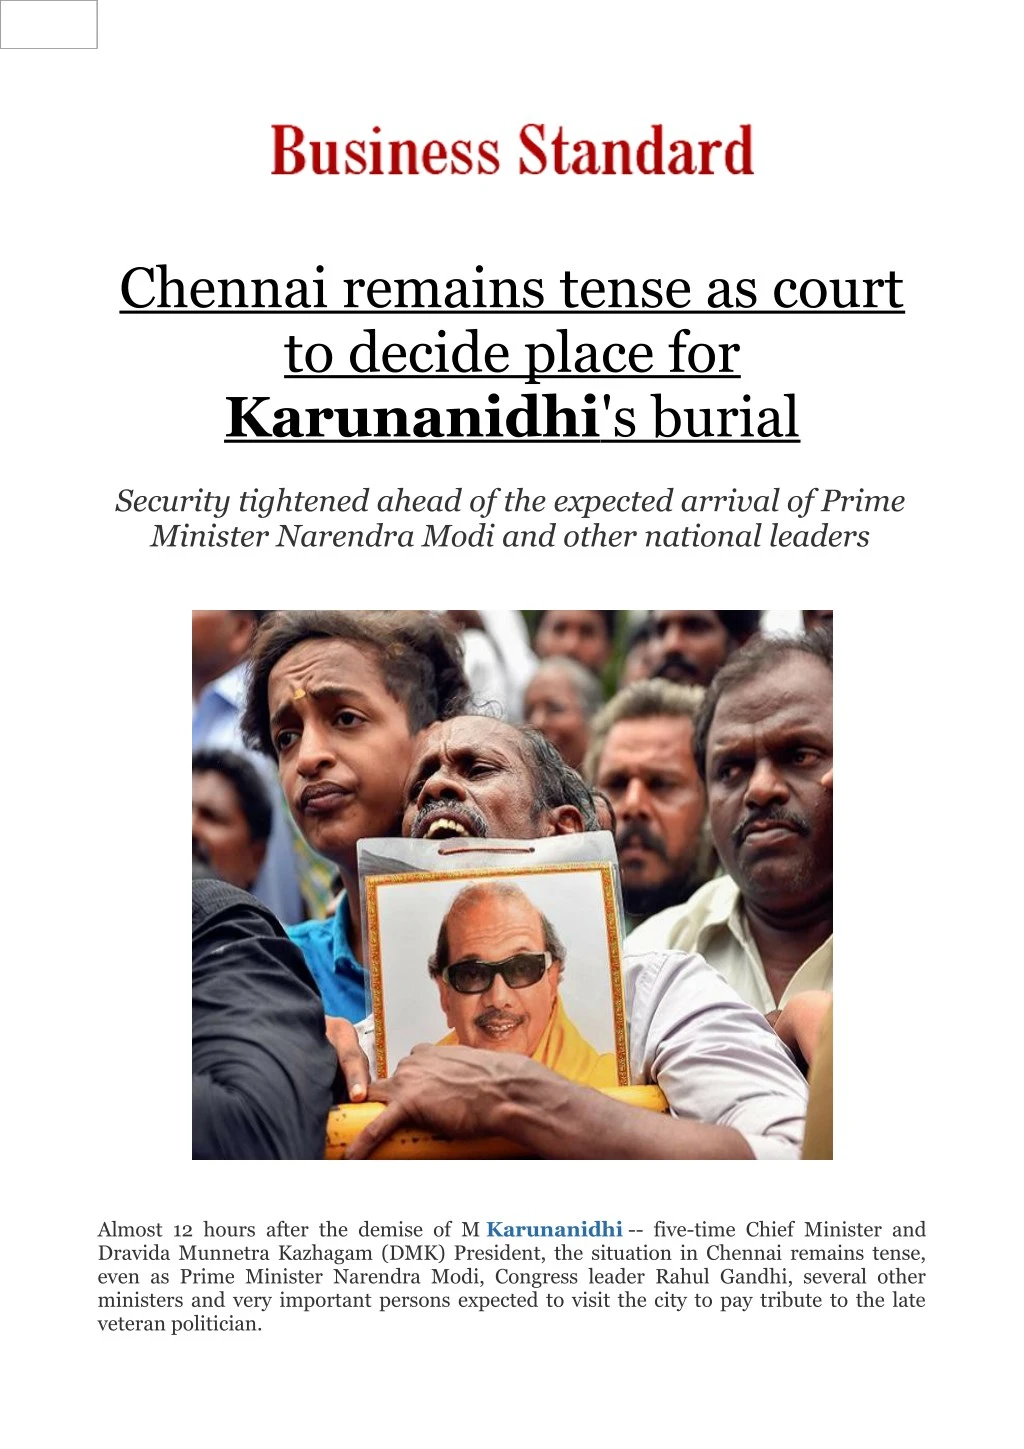 chennai remains tense as court to decide place